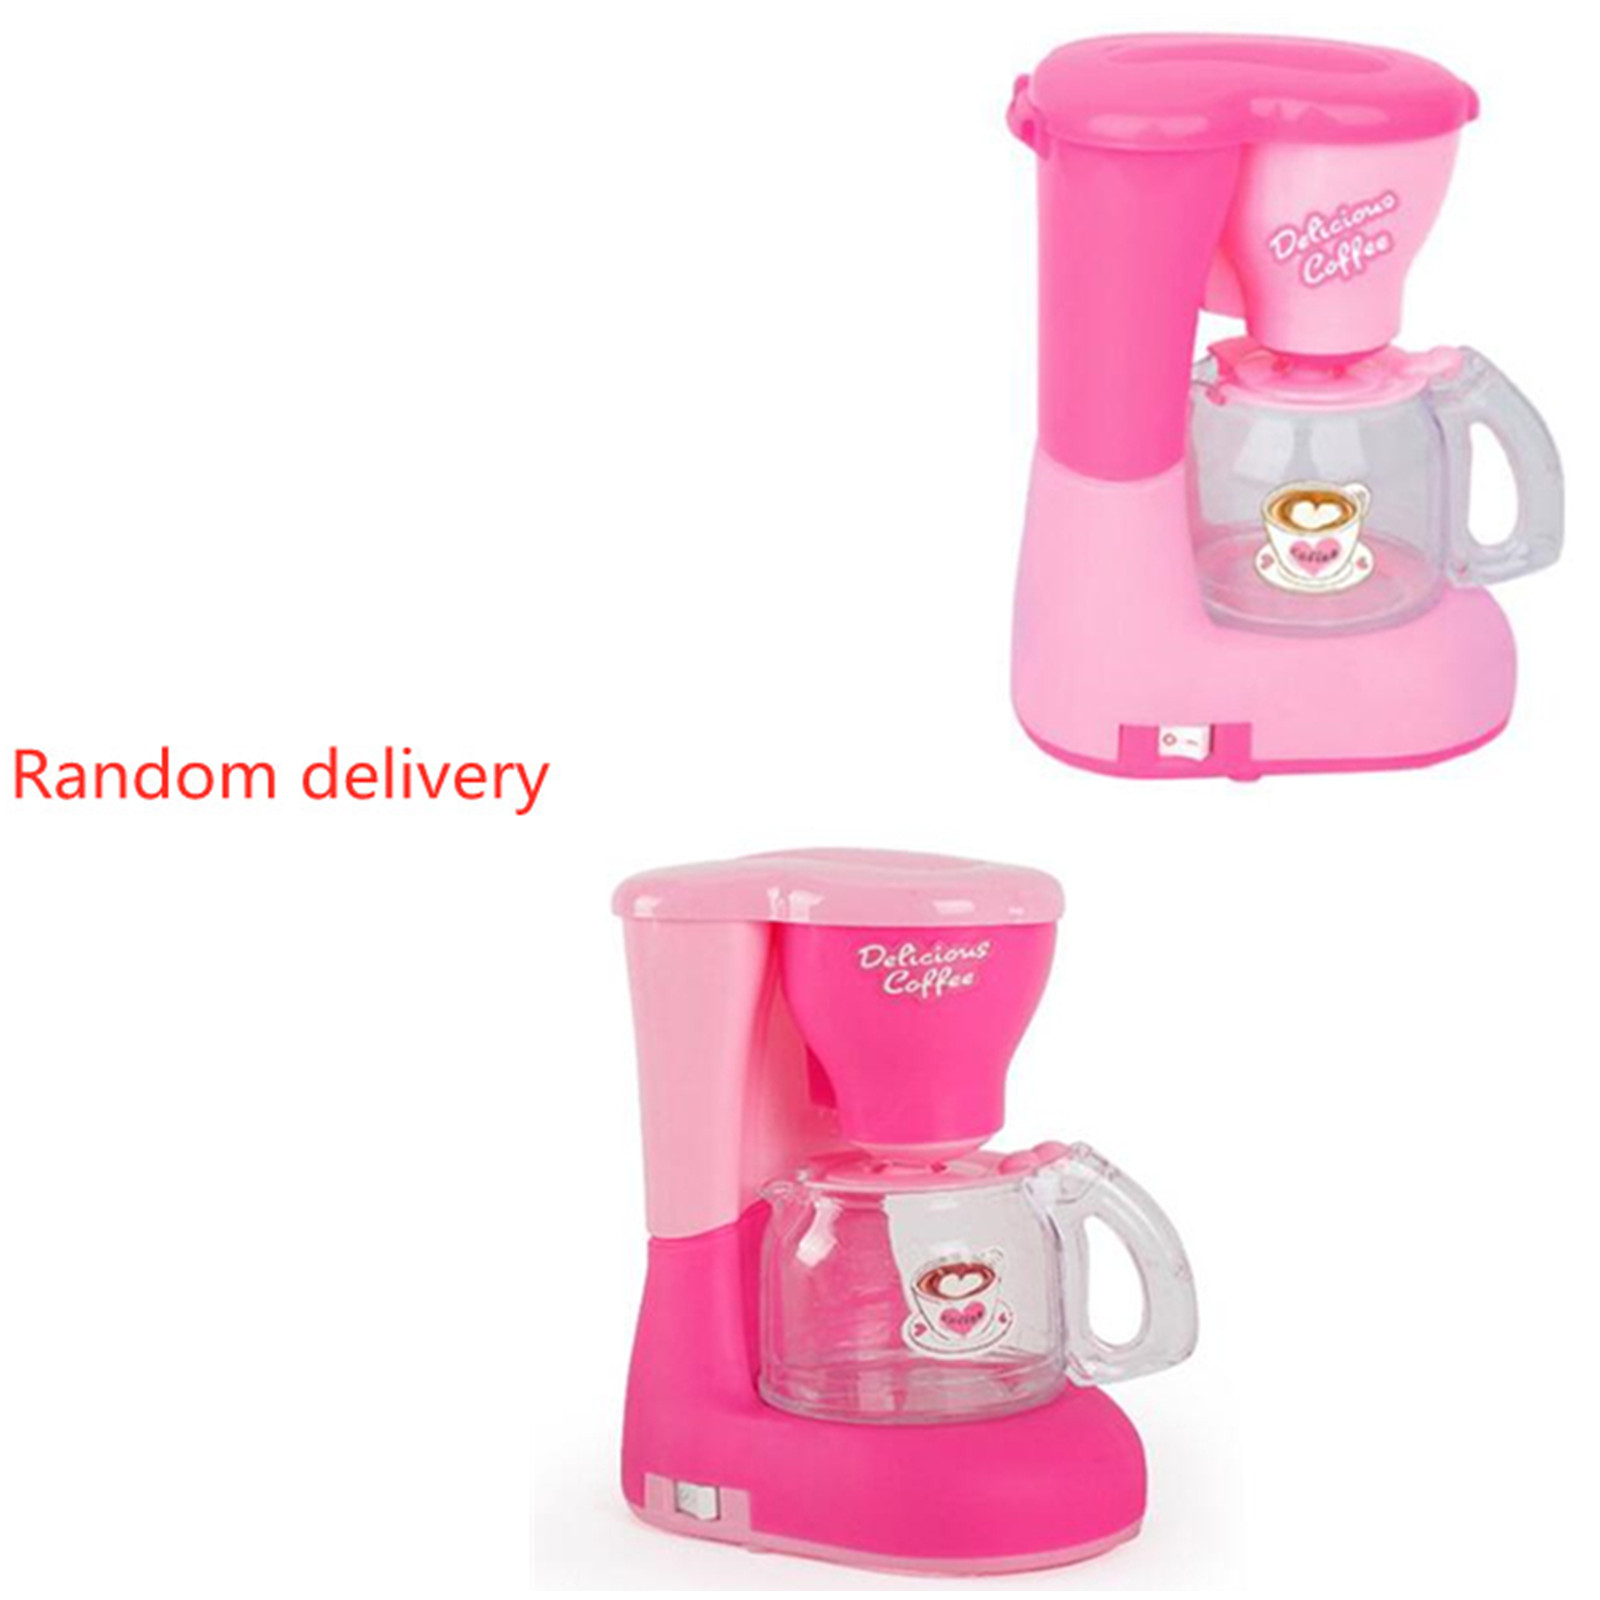 Misco Toys Kids Coffee Maker Pretend Playset Appliance, Children Educational Early Learning Play Toys, Real Life Sounds and Lights, Great Gift Ages